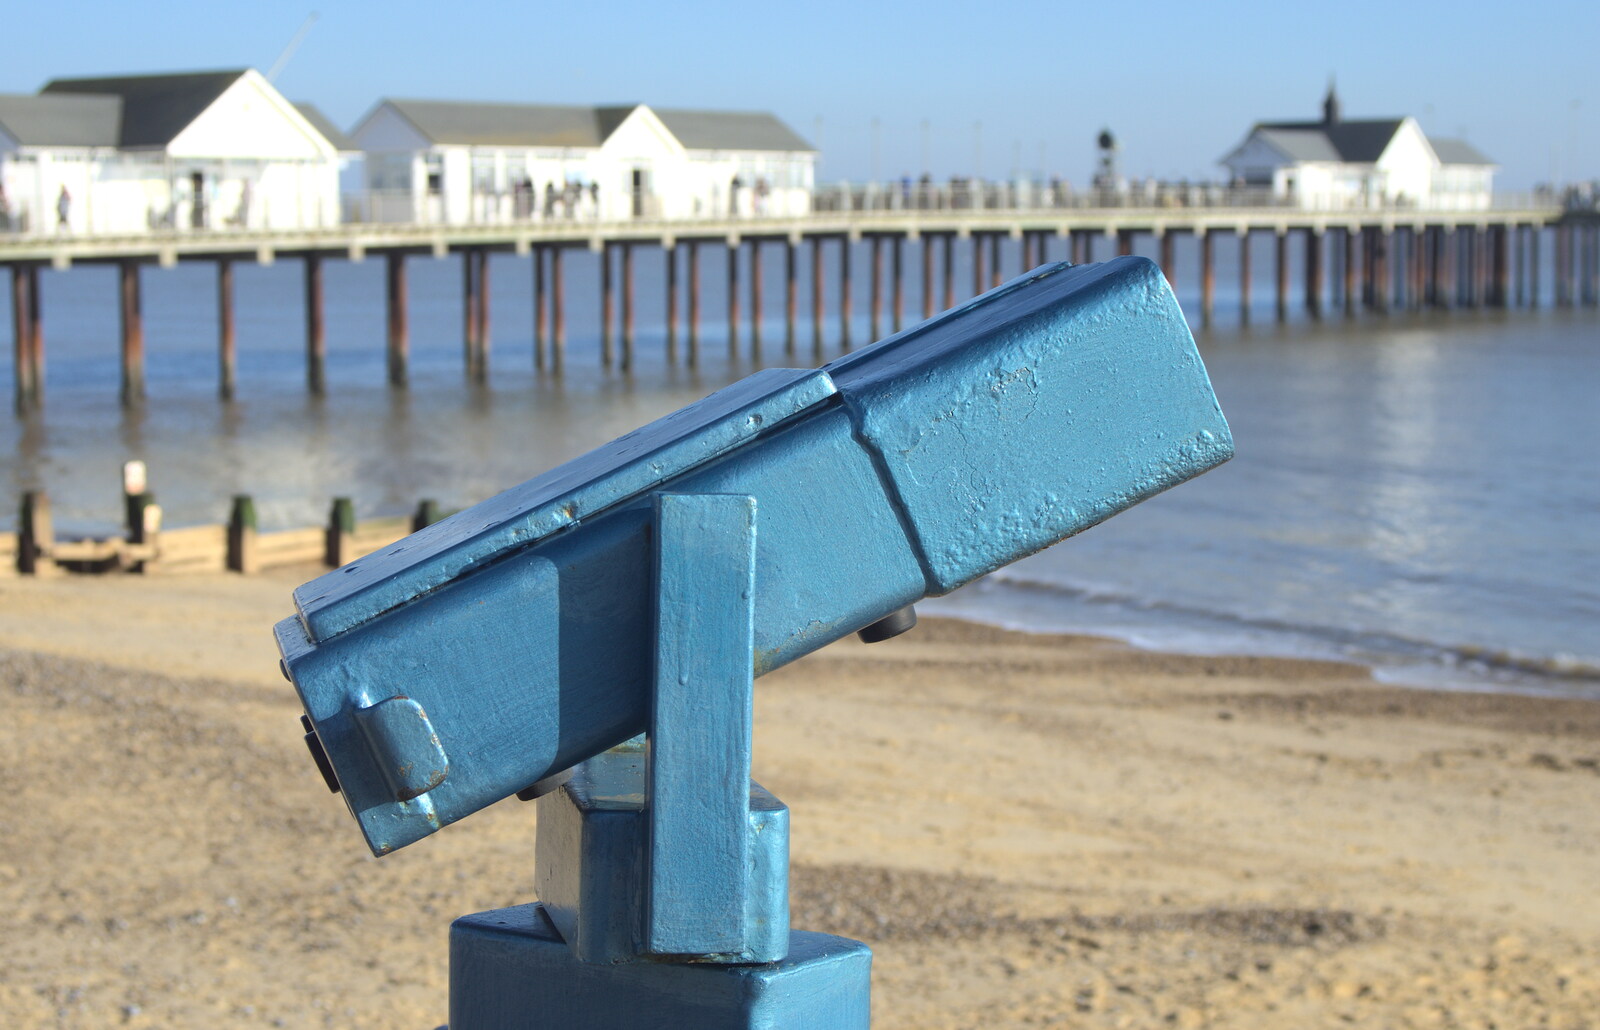 A blue peeper-scope from A Busy Day, Southwold and Thornham, Suffolk - 11th November 2012